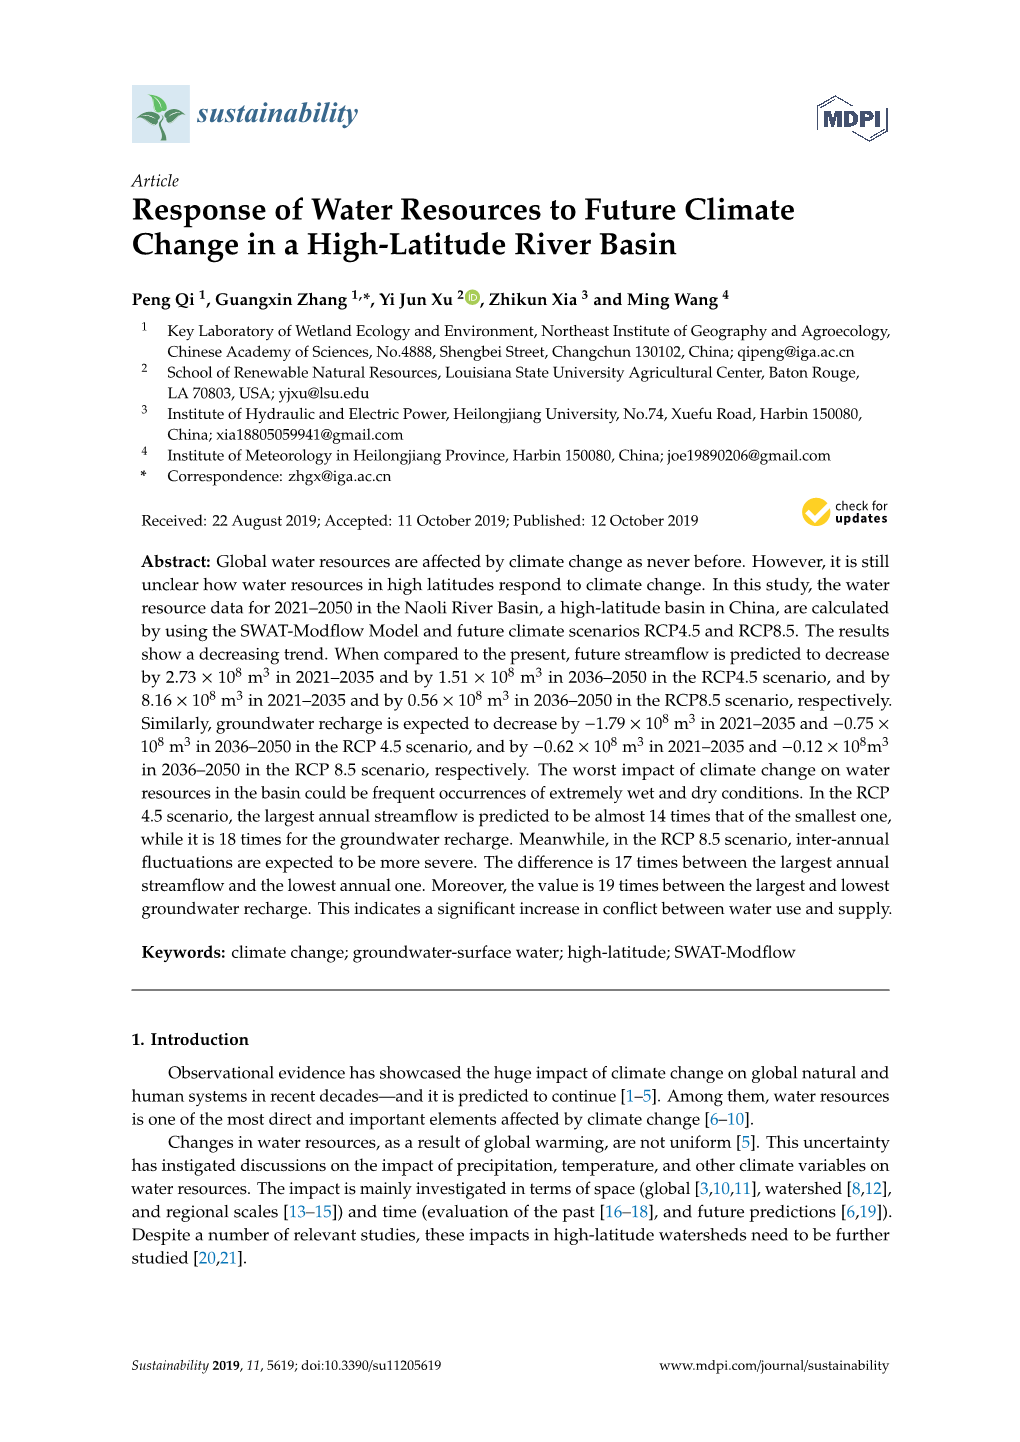 Response of Water Resources to Future Climate Change in a High-Latitude River Basin